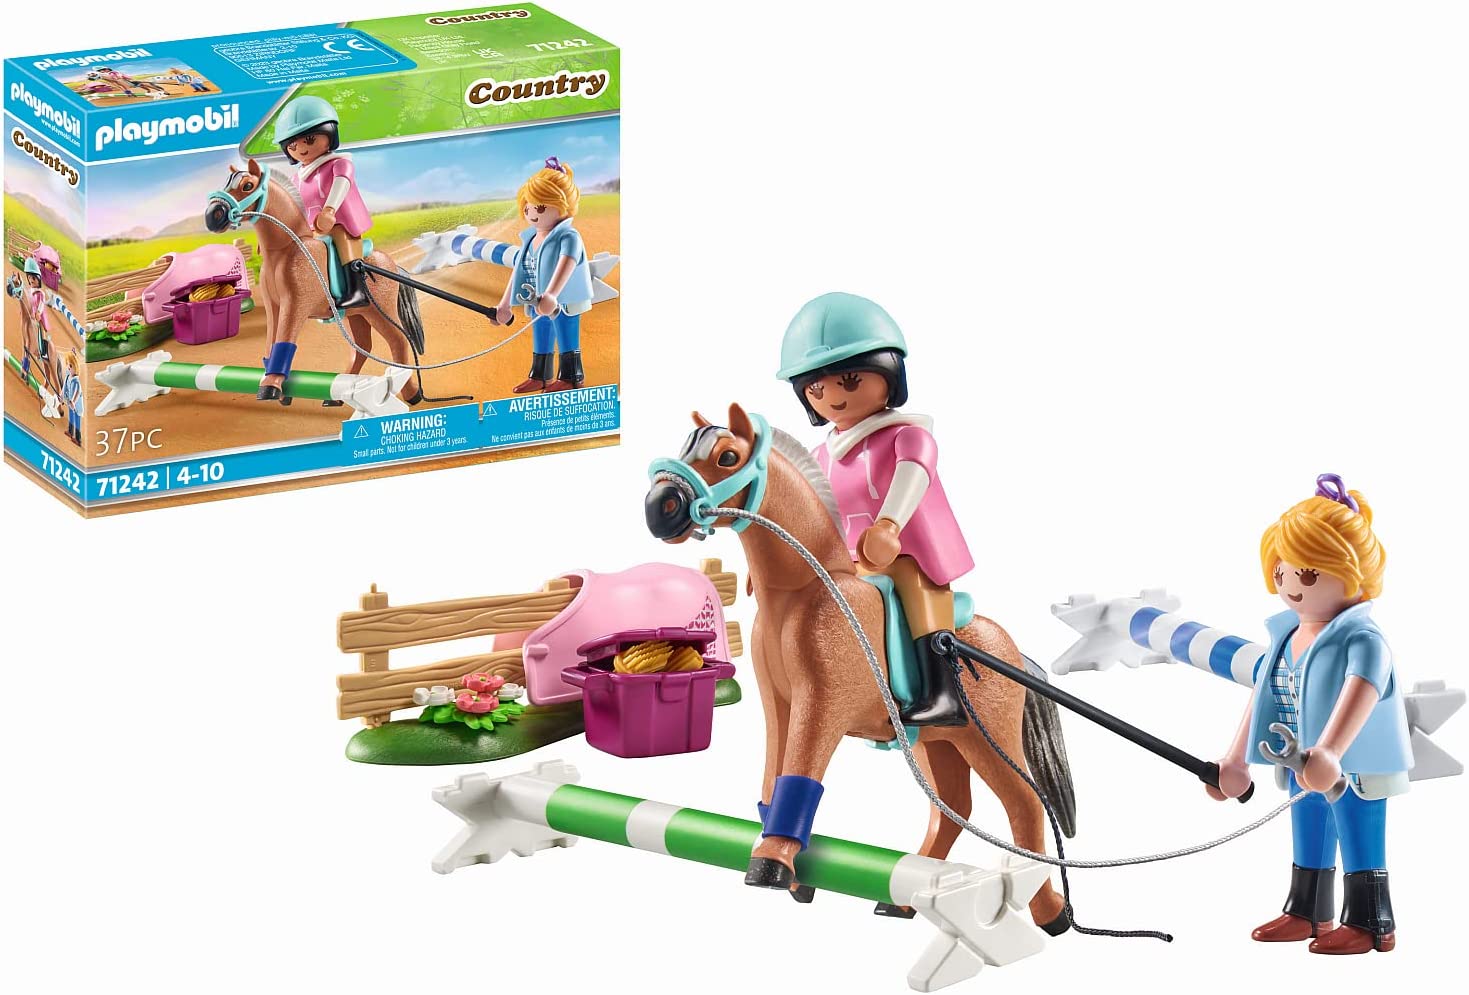 Playmobil Country 71242 Riding Lessons, Riding Teacher for Riding and Jumping for the Riding Farm, Toy for Children from 4 Years